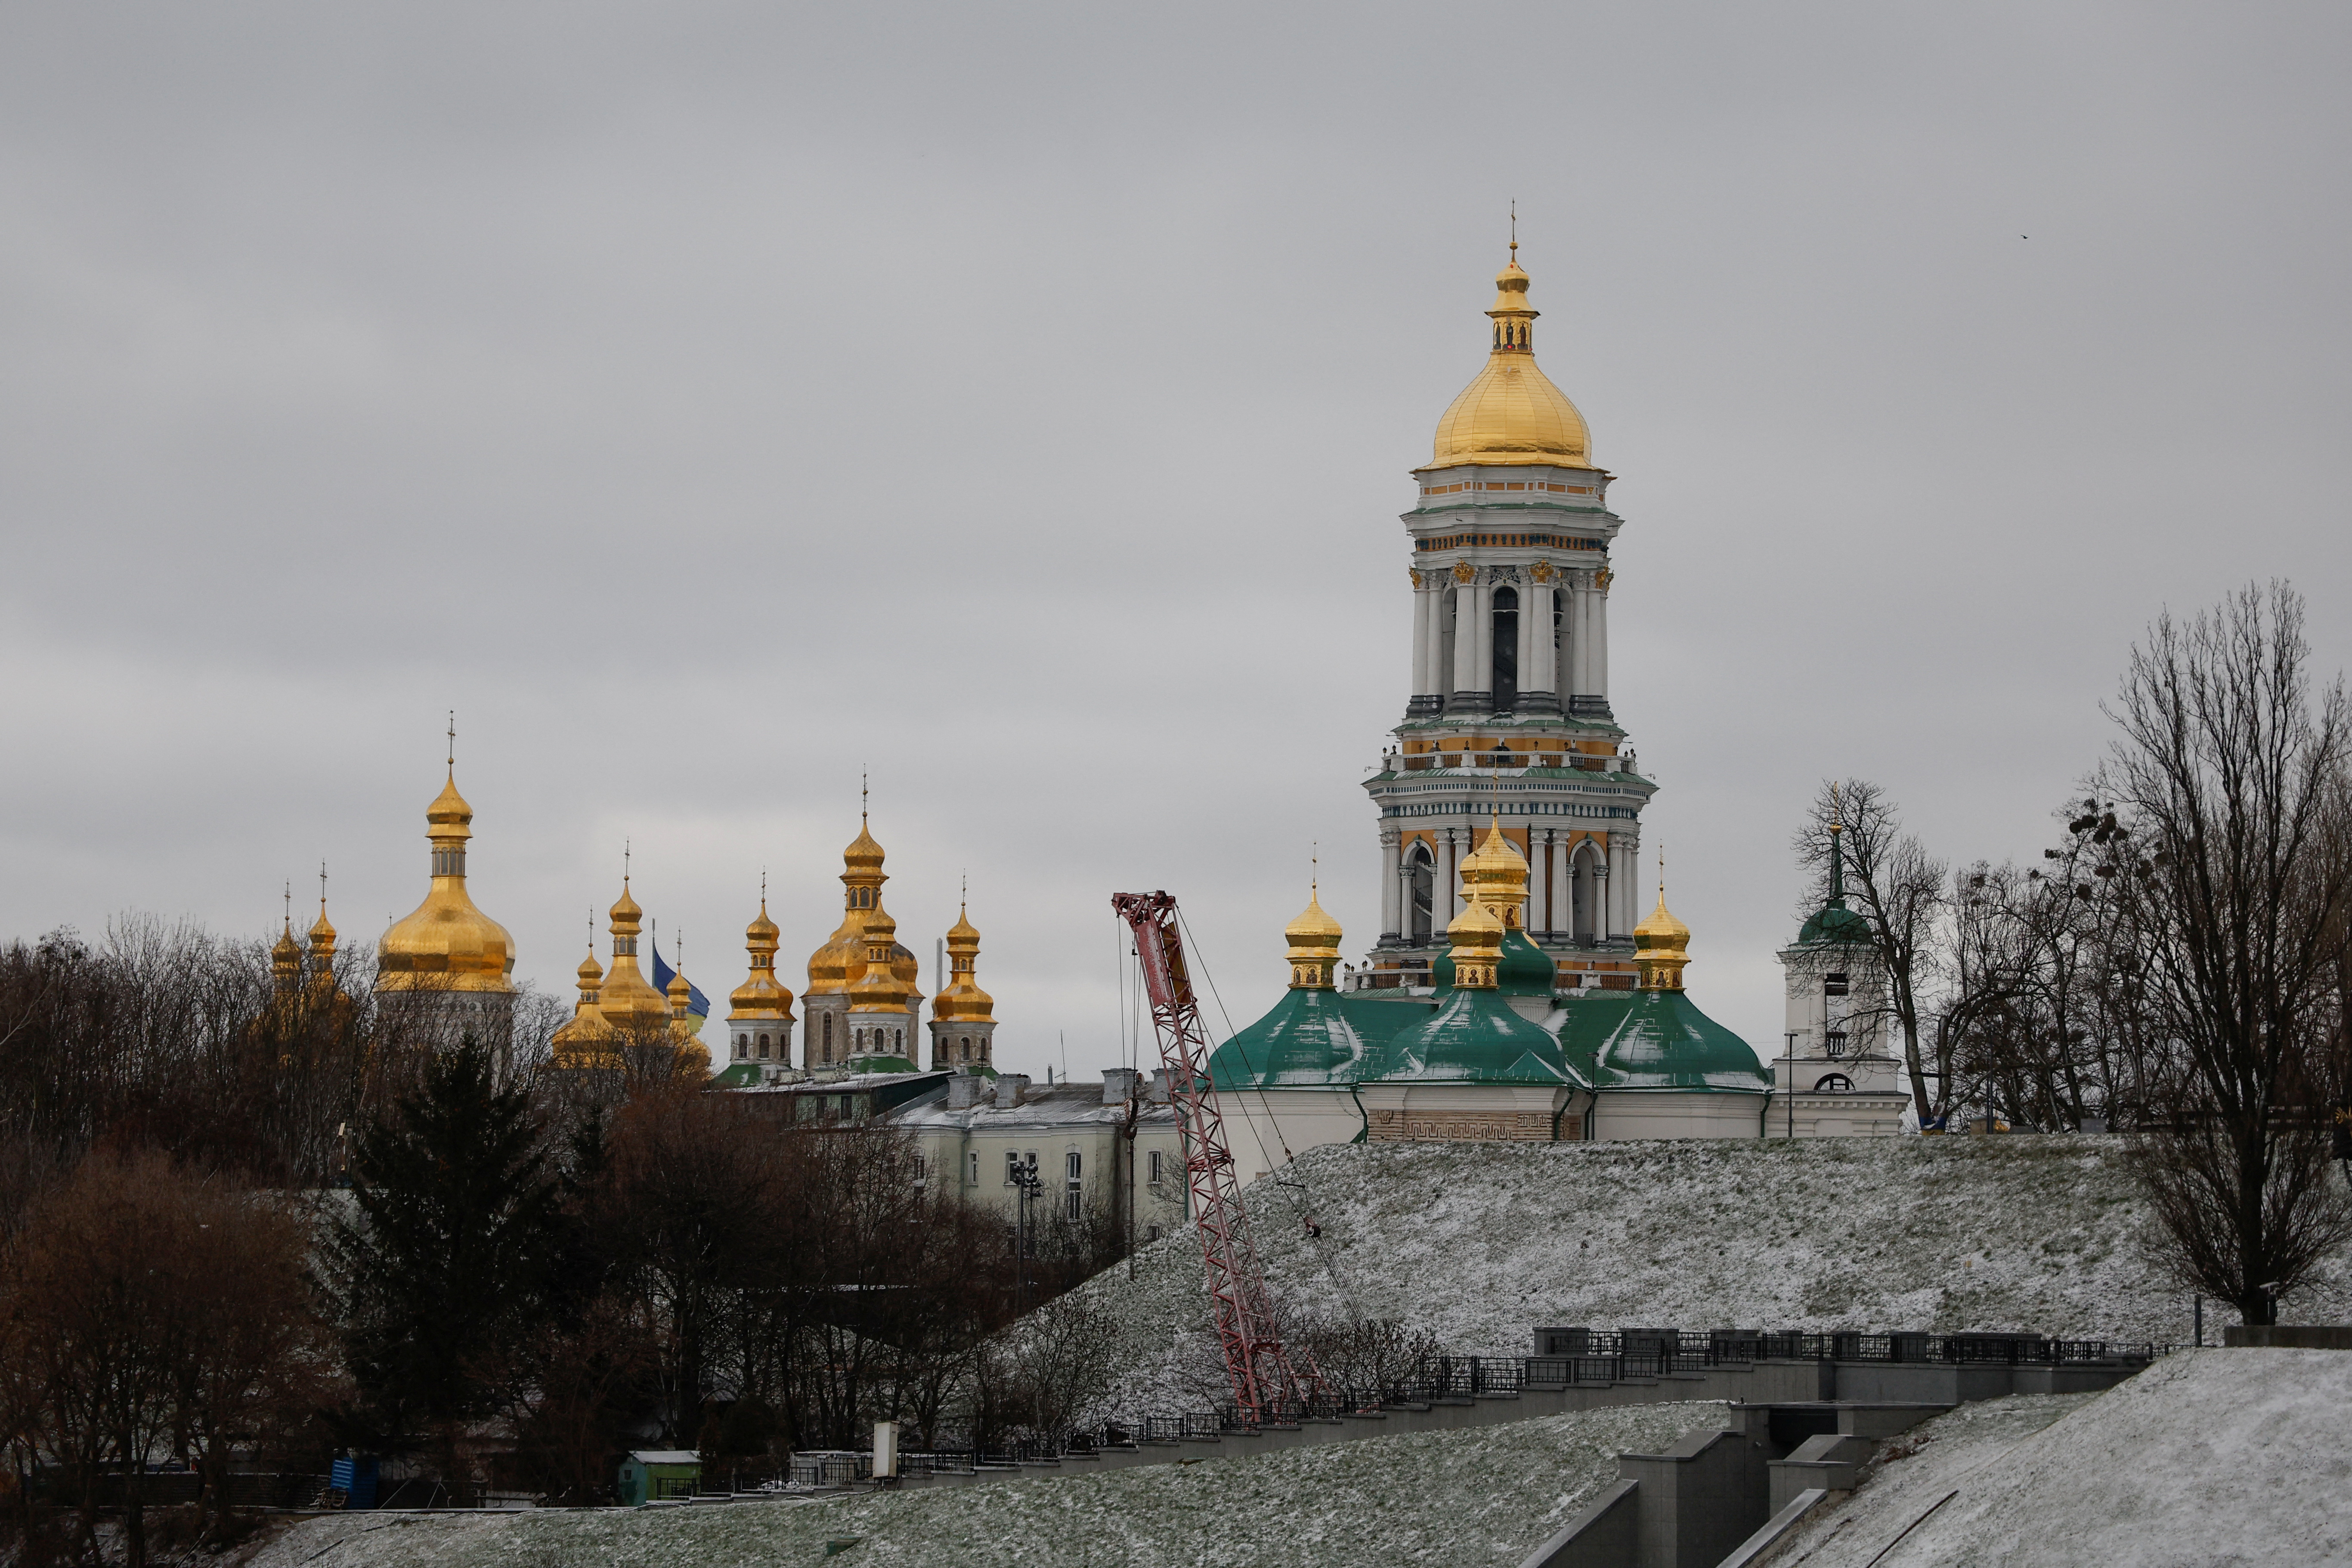 View shows the Great Bell Tower of the Kyiv Pechersk Lavra monastery in Kyiv